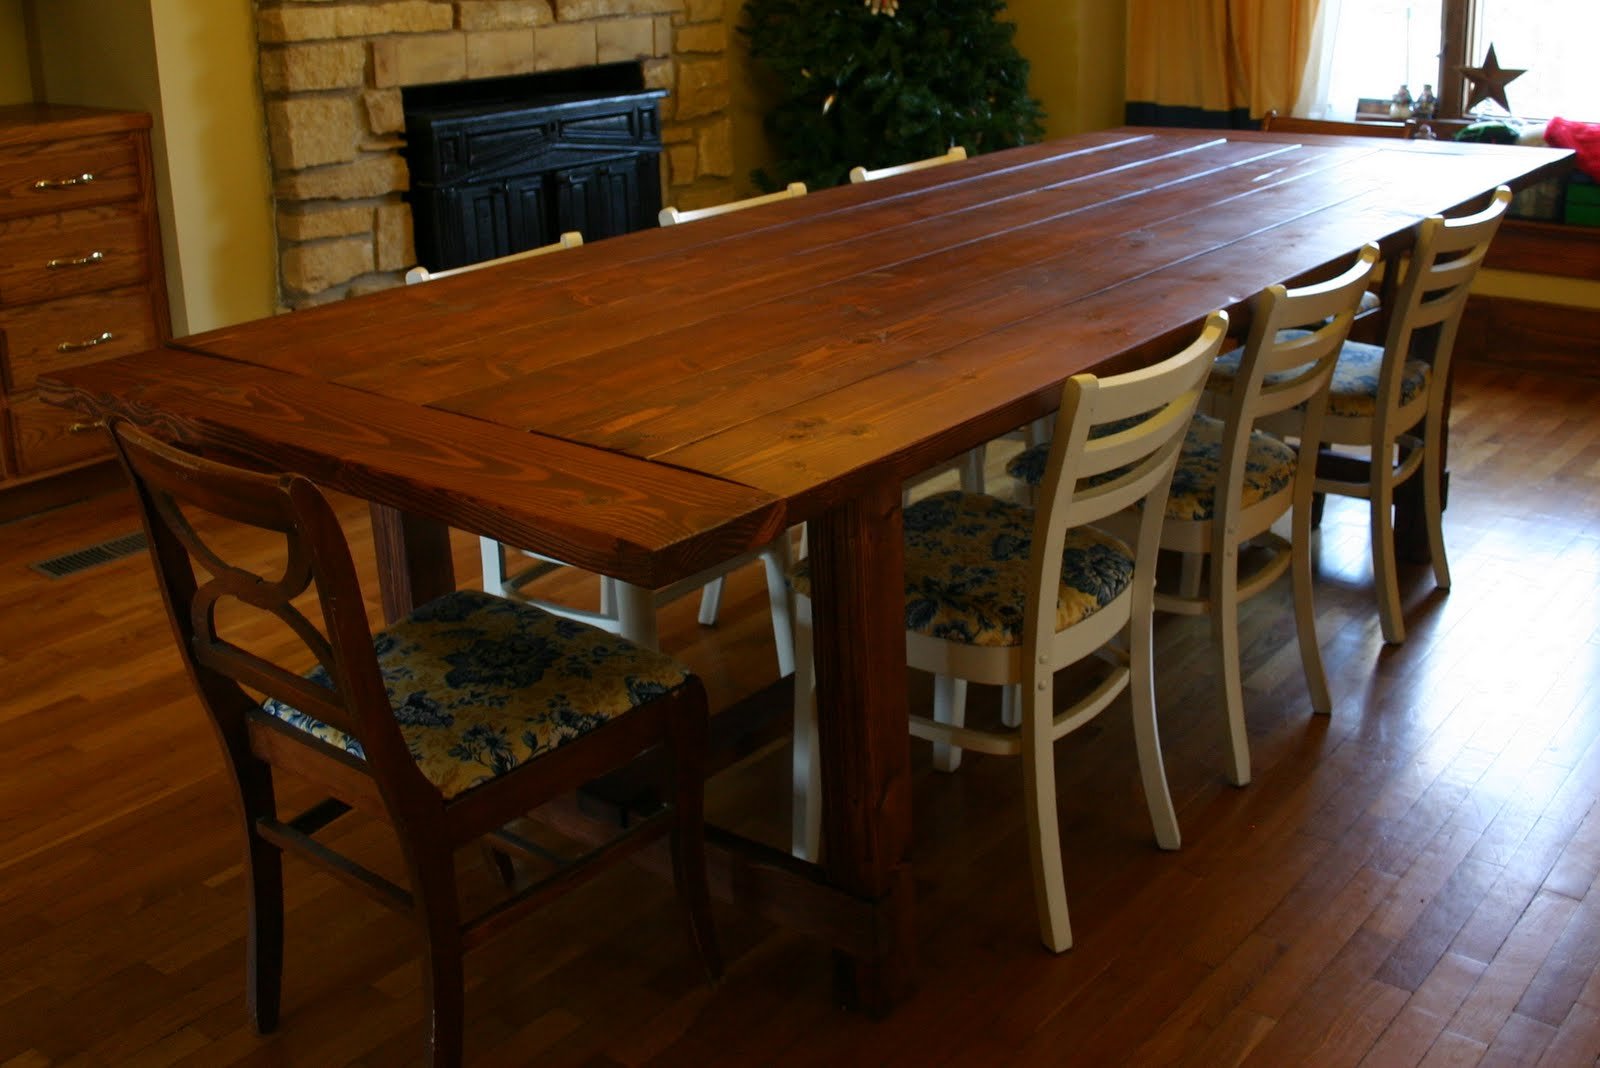 ... popular woodworking plans kitchen table table woodworking plans free